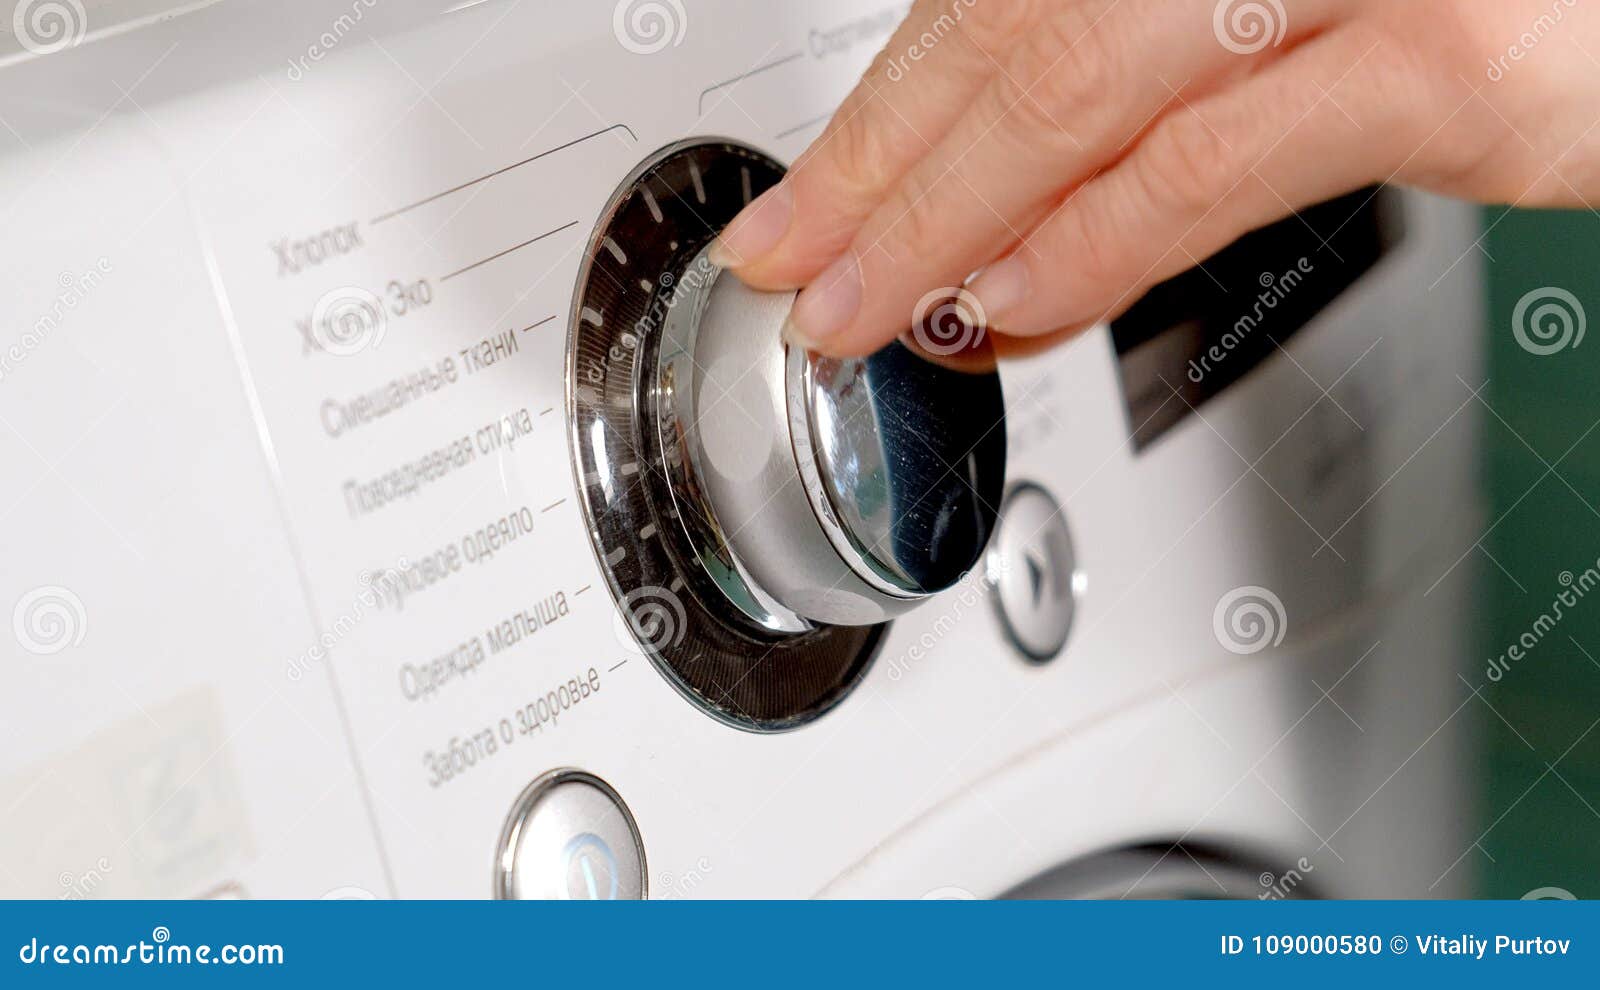 Woman Adding Detergent To Compartment In Washing Machine And